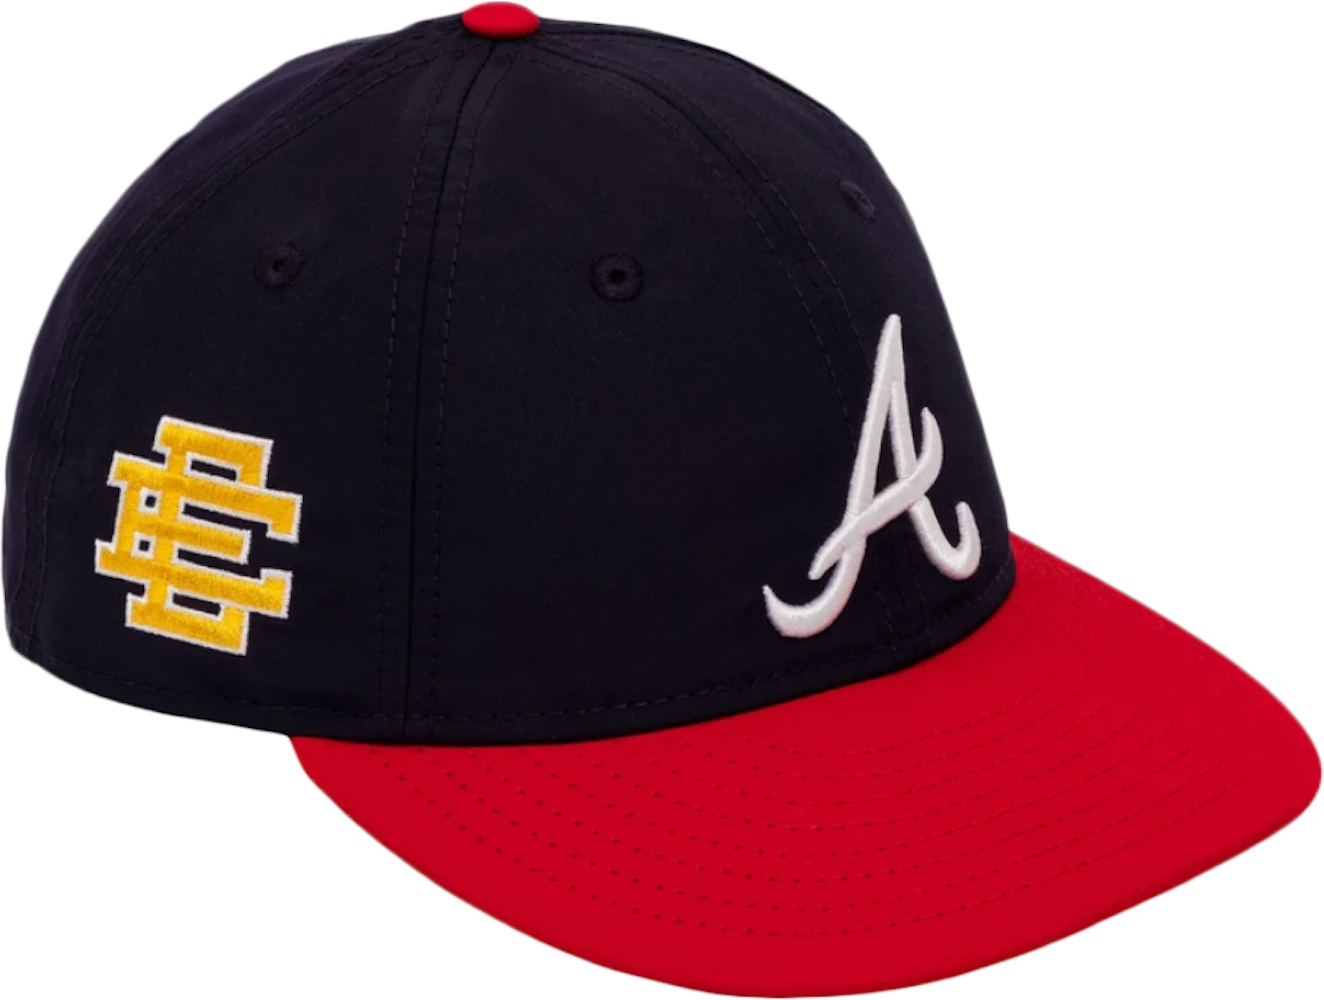 Eric Emanuel EE Retro Crown Braves Hat Navy/Red/Yellow - SS20 - US